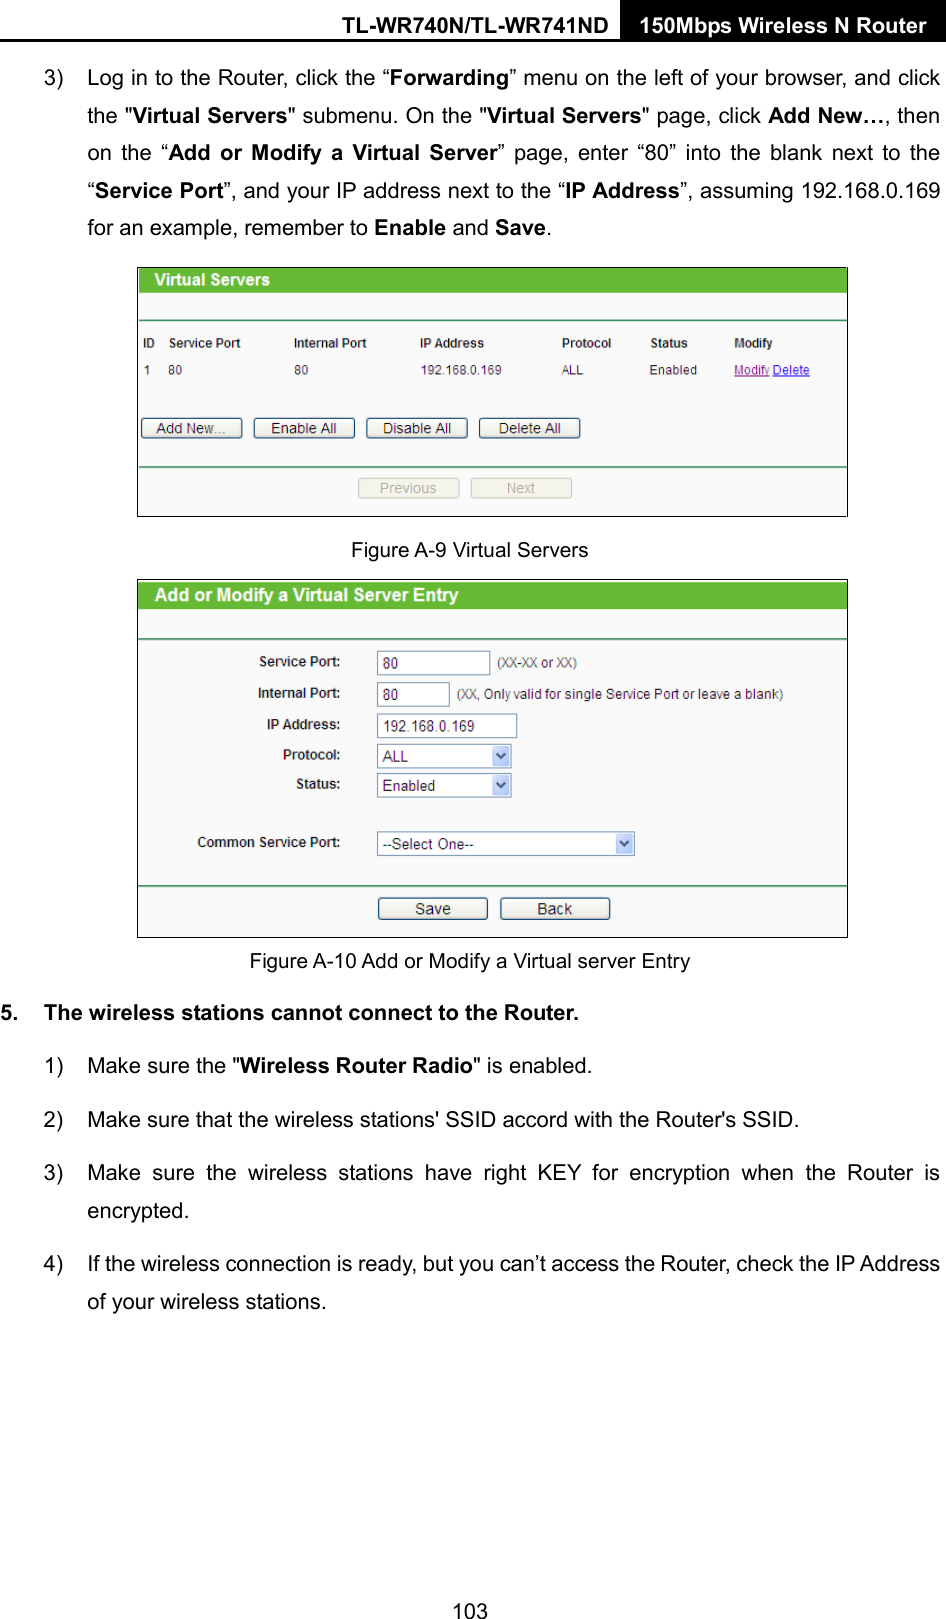 TL-WR740N/TL-WR741ND 150Mbps Wireless N Router  3) Log in to the Router, click the “Forwarding” menu on the left of your browser, and click the &quot;Virtual Servers&quot; submenu. On the &quot;Virtual Servers&quot; page, click Add New…, then on the “Add or Modify a Virtual Server” page, enter “80” into the blank next to the “Service Port”, and your IP address next to the “IP Address”, assuming 192.168.0.169 for an example, remember to Enable and Save.  Figure A-9 Virtual Servers  Figure A-10 Add or Modify a Virtual server Entry 5. The wireless stations cannot connect to the Router. 1) Make sure the &quot;Wireless Router Radio&quot; is enabled. 2) Make sure that the wireless stations&apos; SSID accord with the Router&apos;s SSID. 3) Make sure the wireless stations have right KEY for encryption when the Router is encrypted. 4) If the wireless connection is ready, but you can’t access the Router, check the IP Address of your wireless stations. 103 